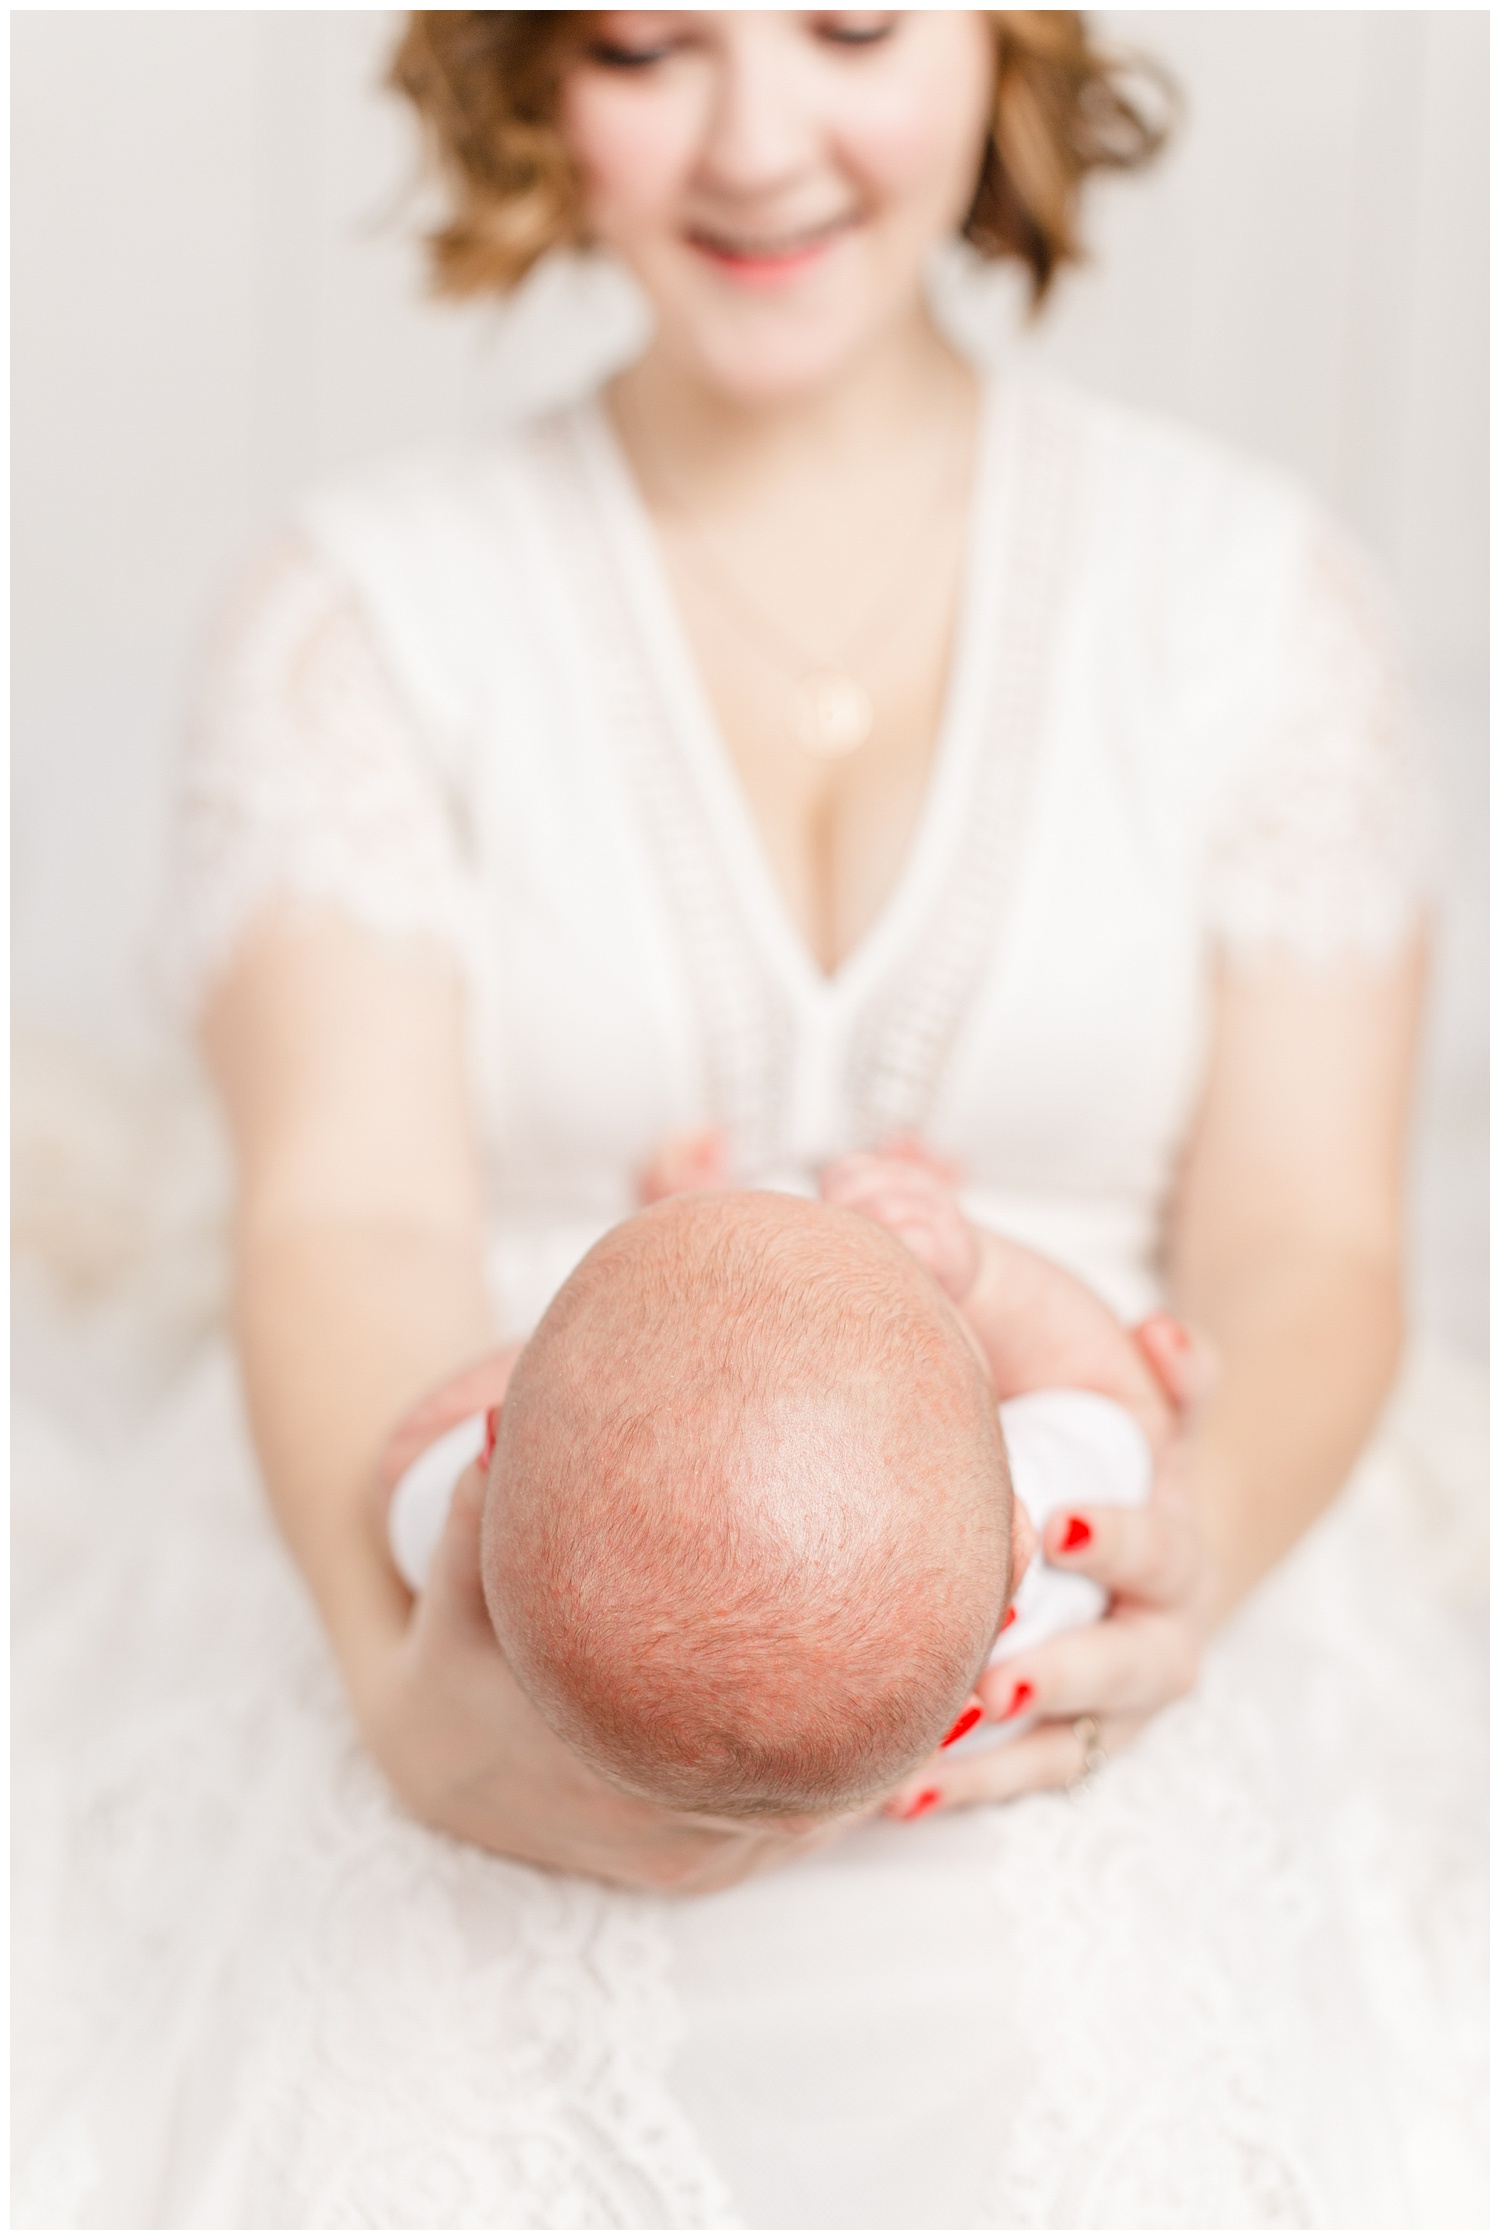 Bree dressed in white lace sits on her bed and smiles at her new baby boy | CB Studio